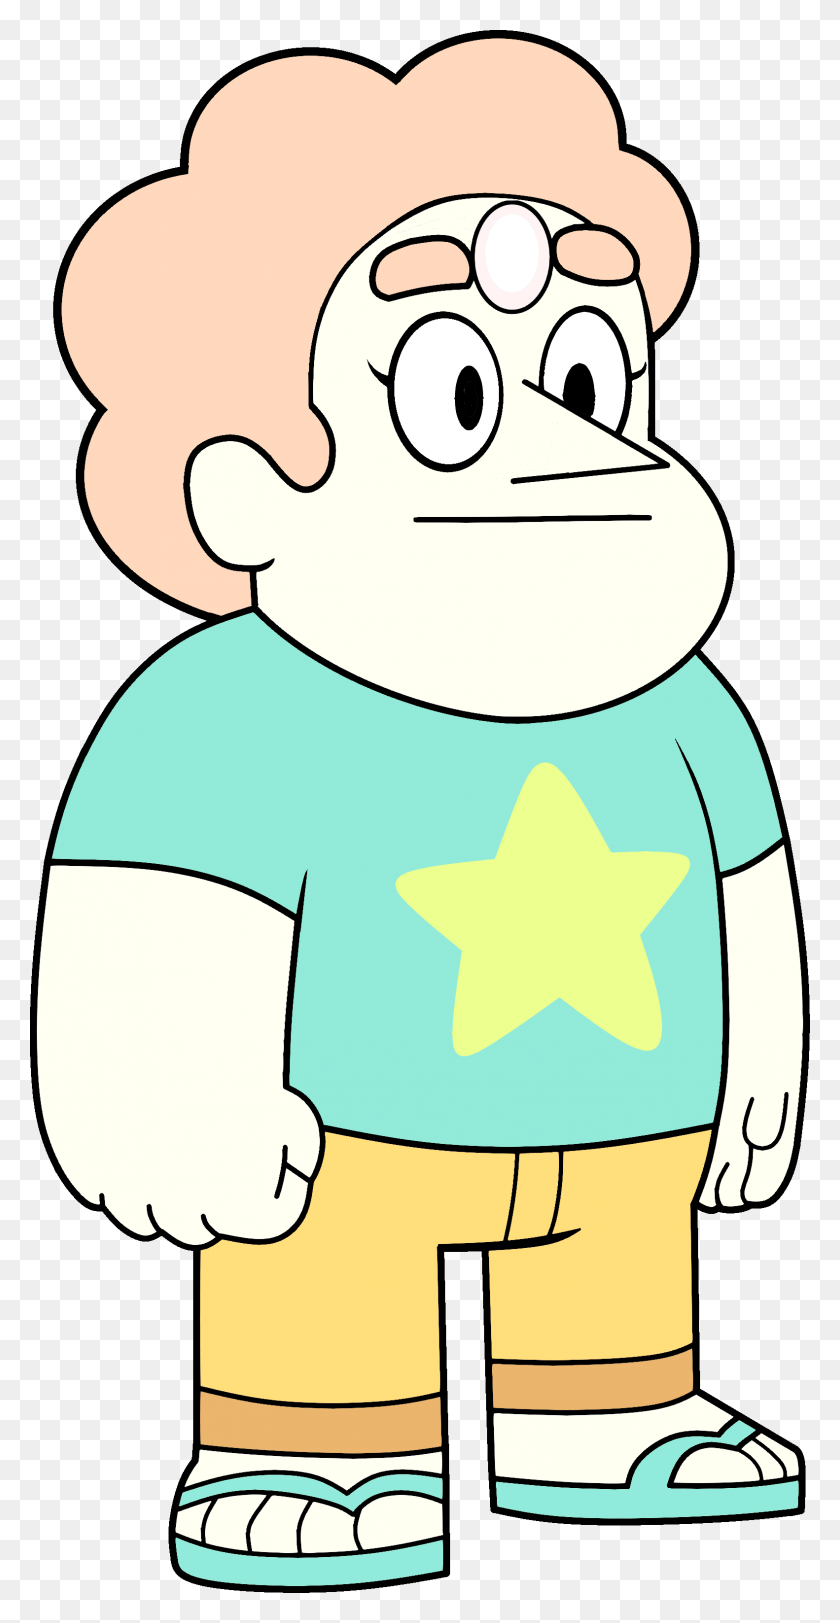 1582x3171 Image Steven Tag Pearl Steven Universe Wiki Steven Universe Steven Tag Pearl, Star Symbol, Symbol, Recycling Symbol HD PNG Download